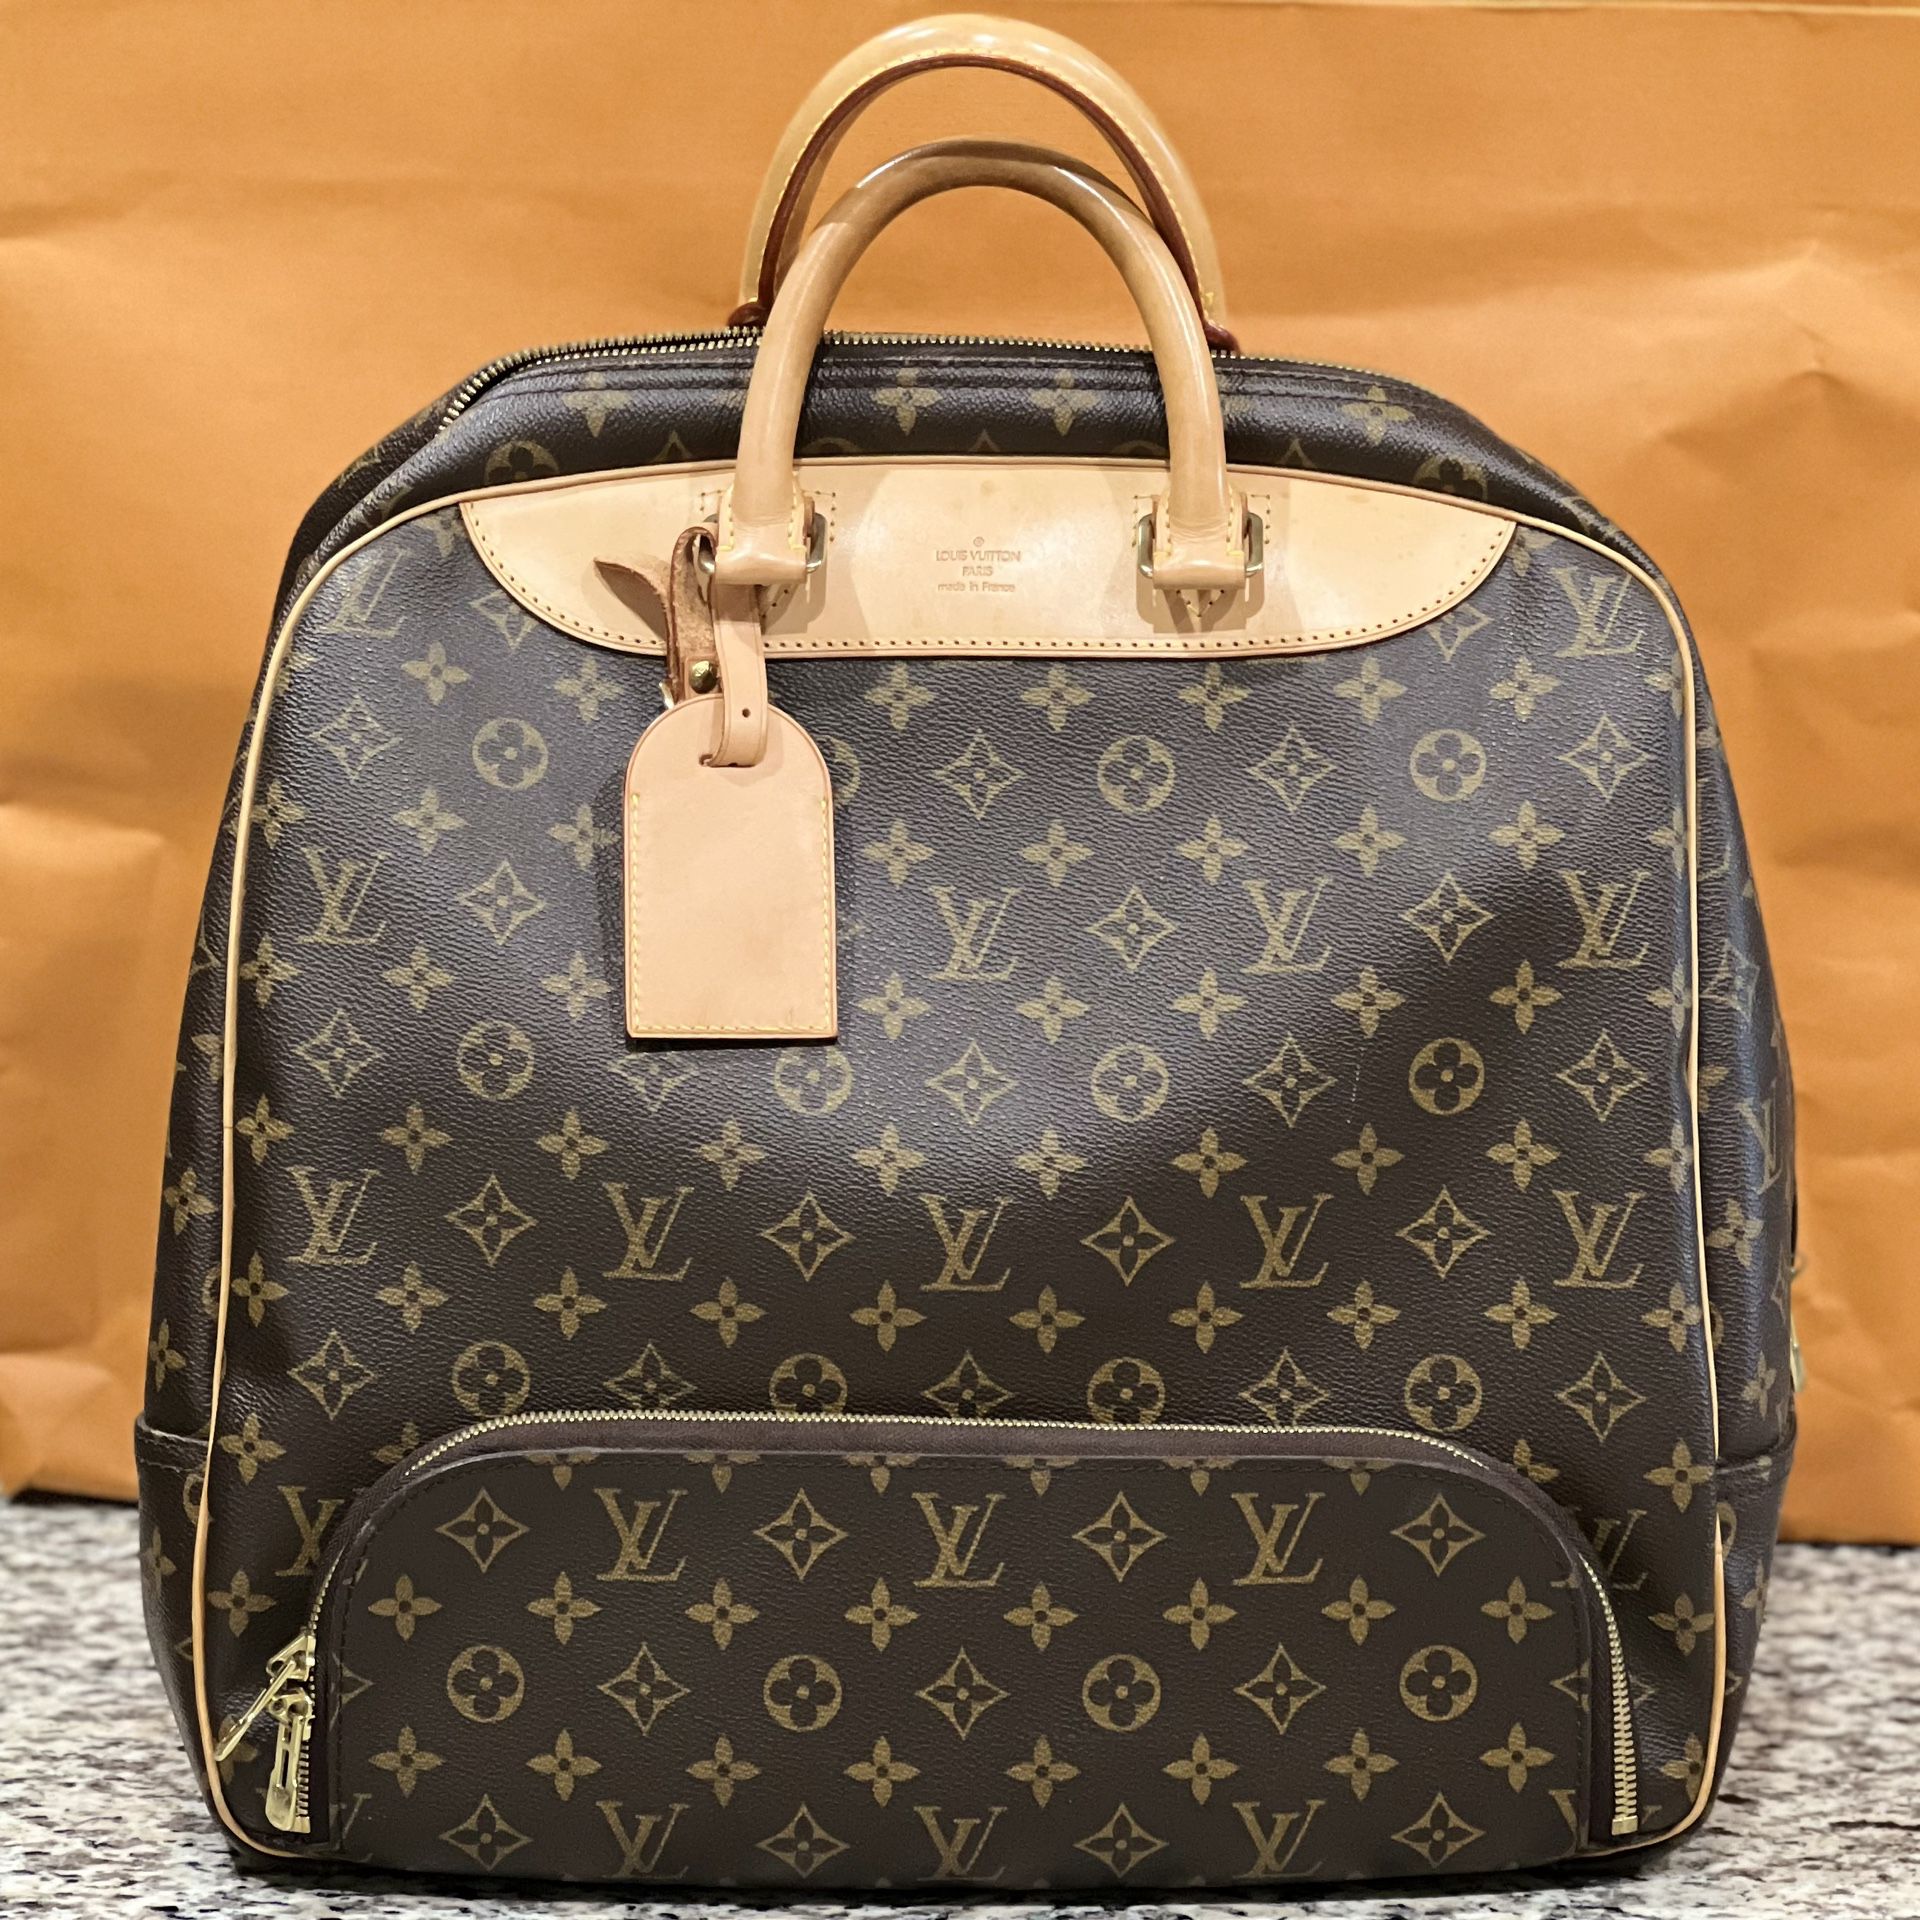 Louis Vuitton Used Luggage For Sale